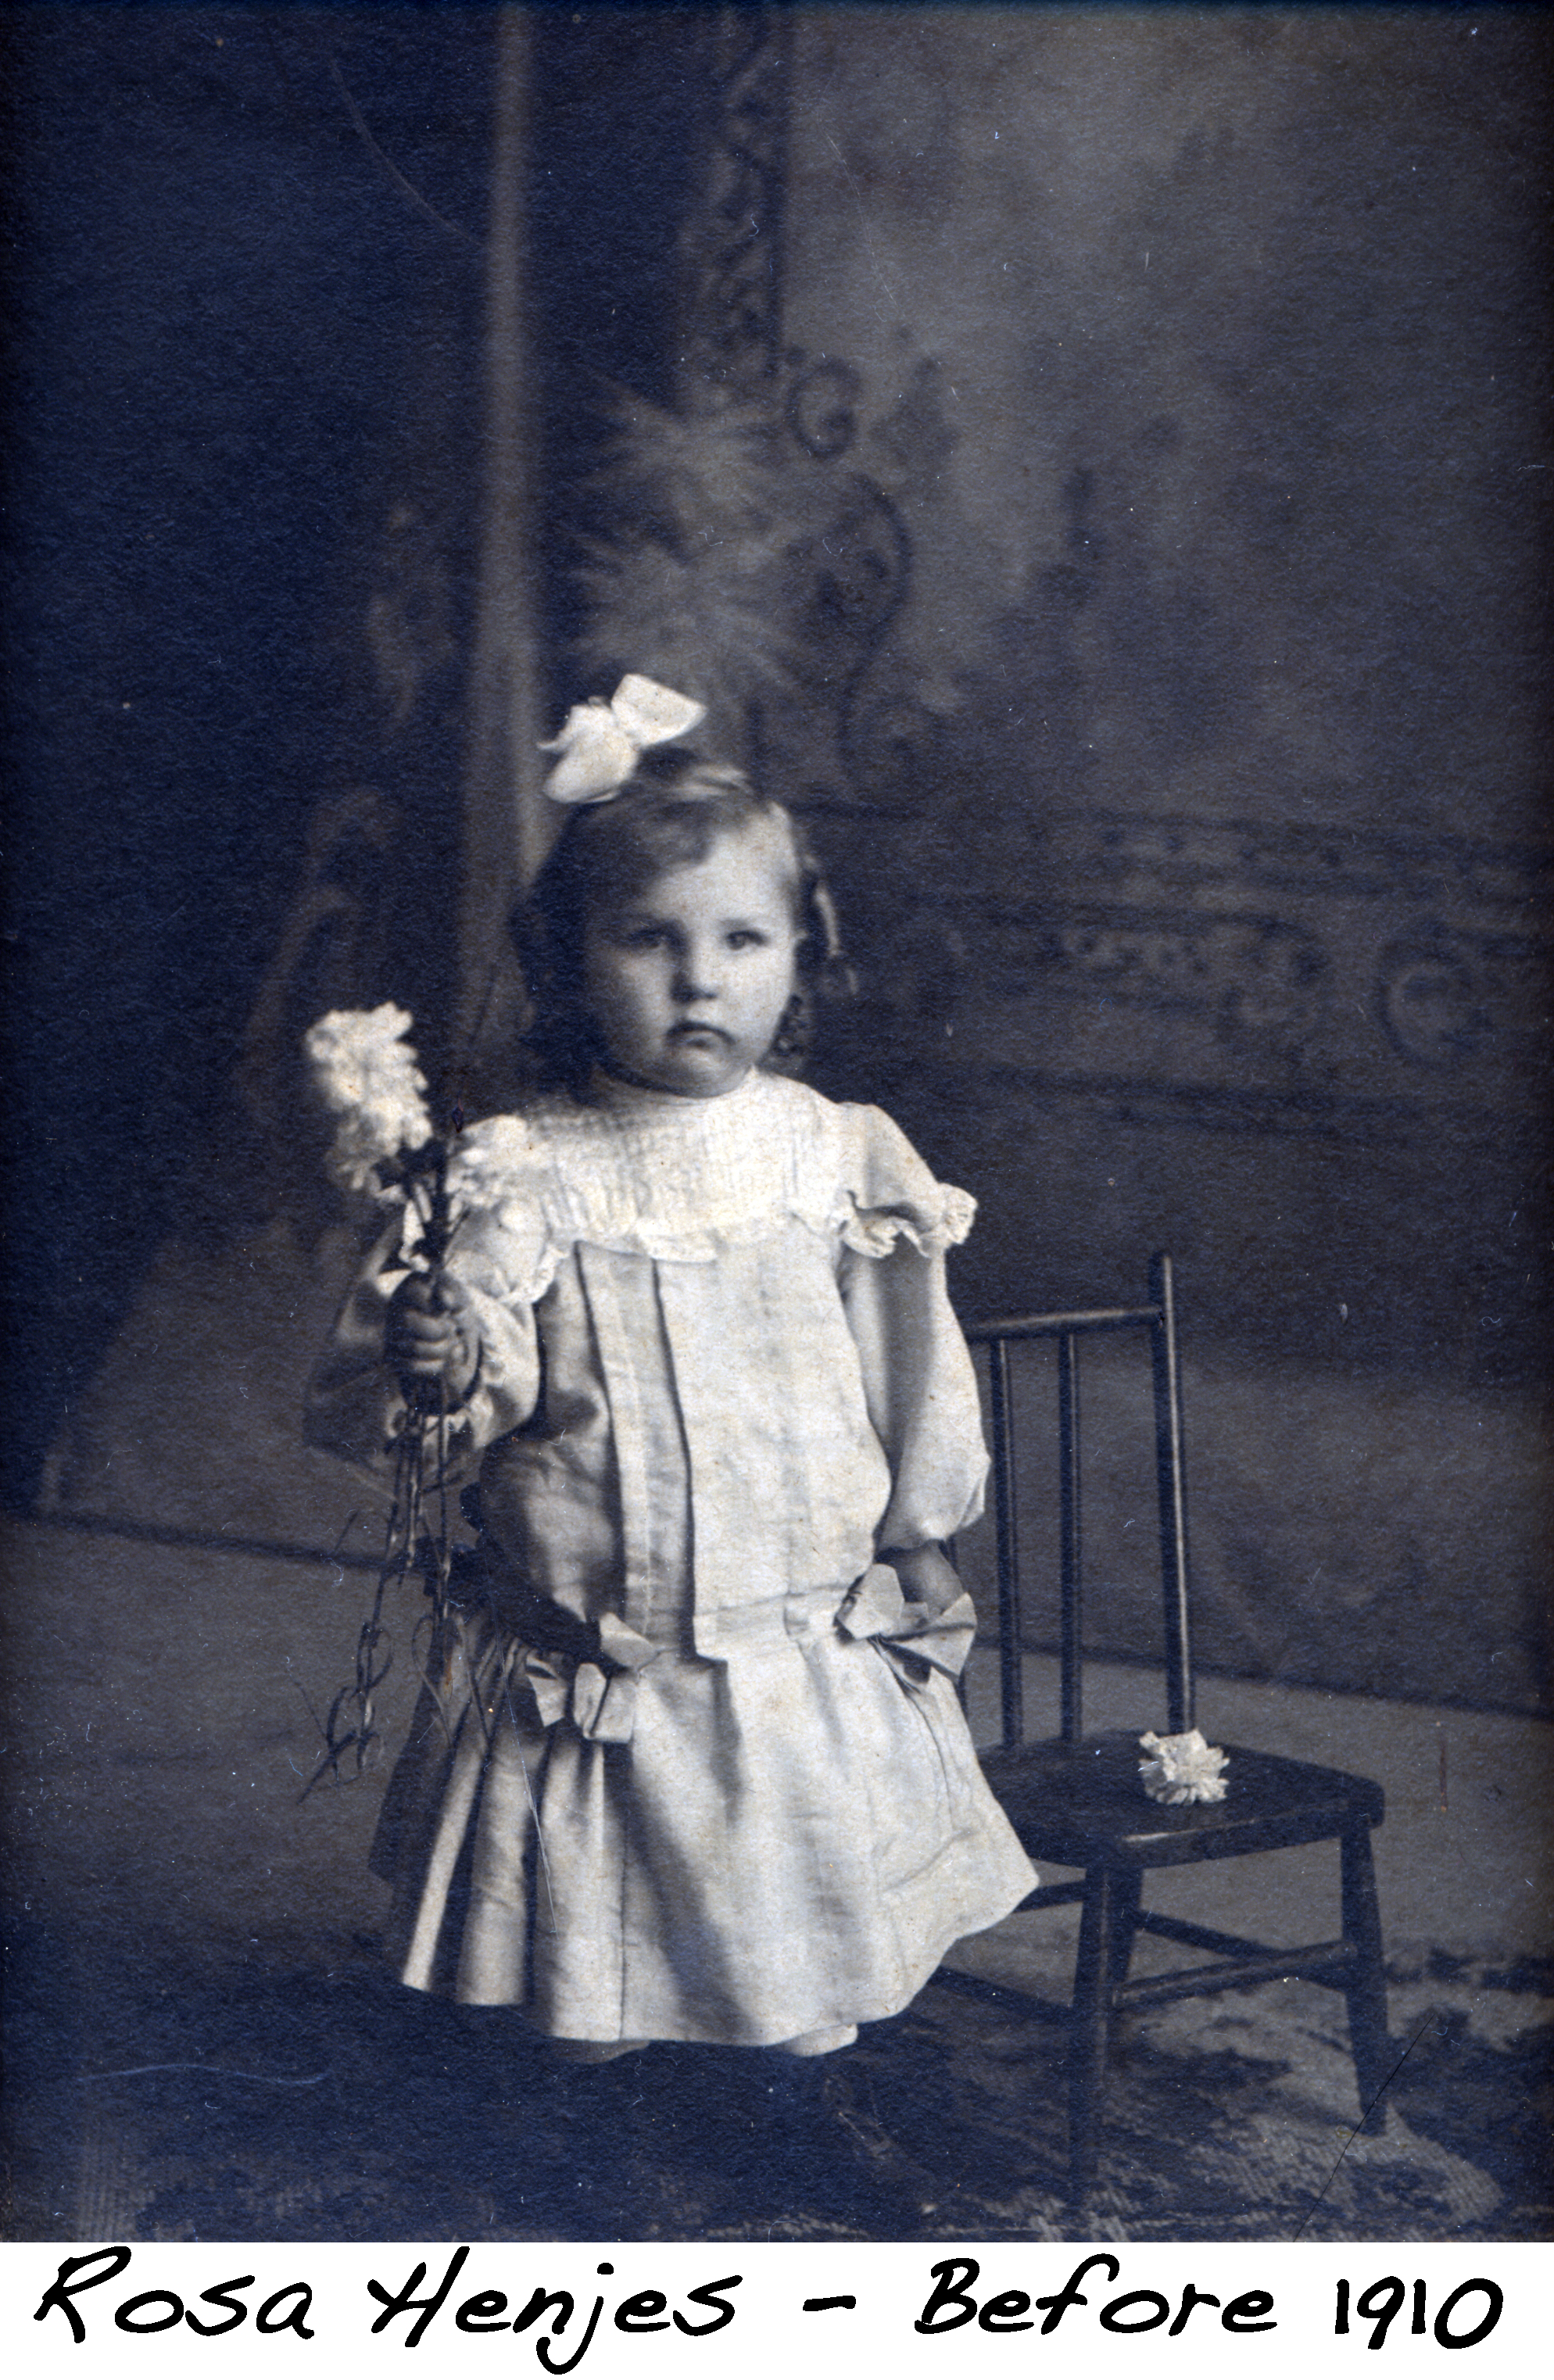 Baby Rose Henjes holds a flower and has a bow in her hair for her portrait